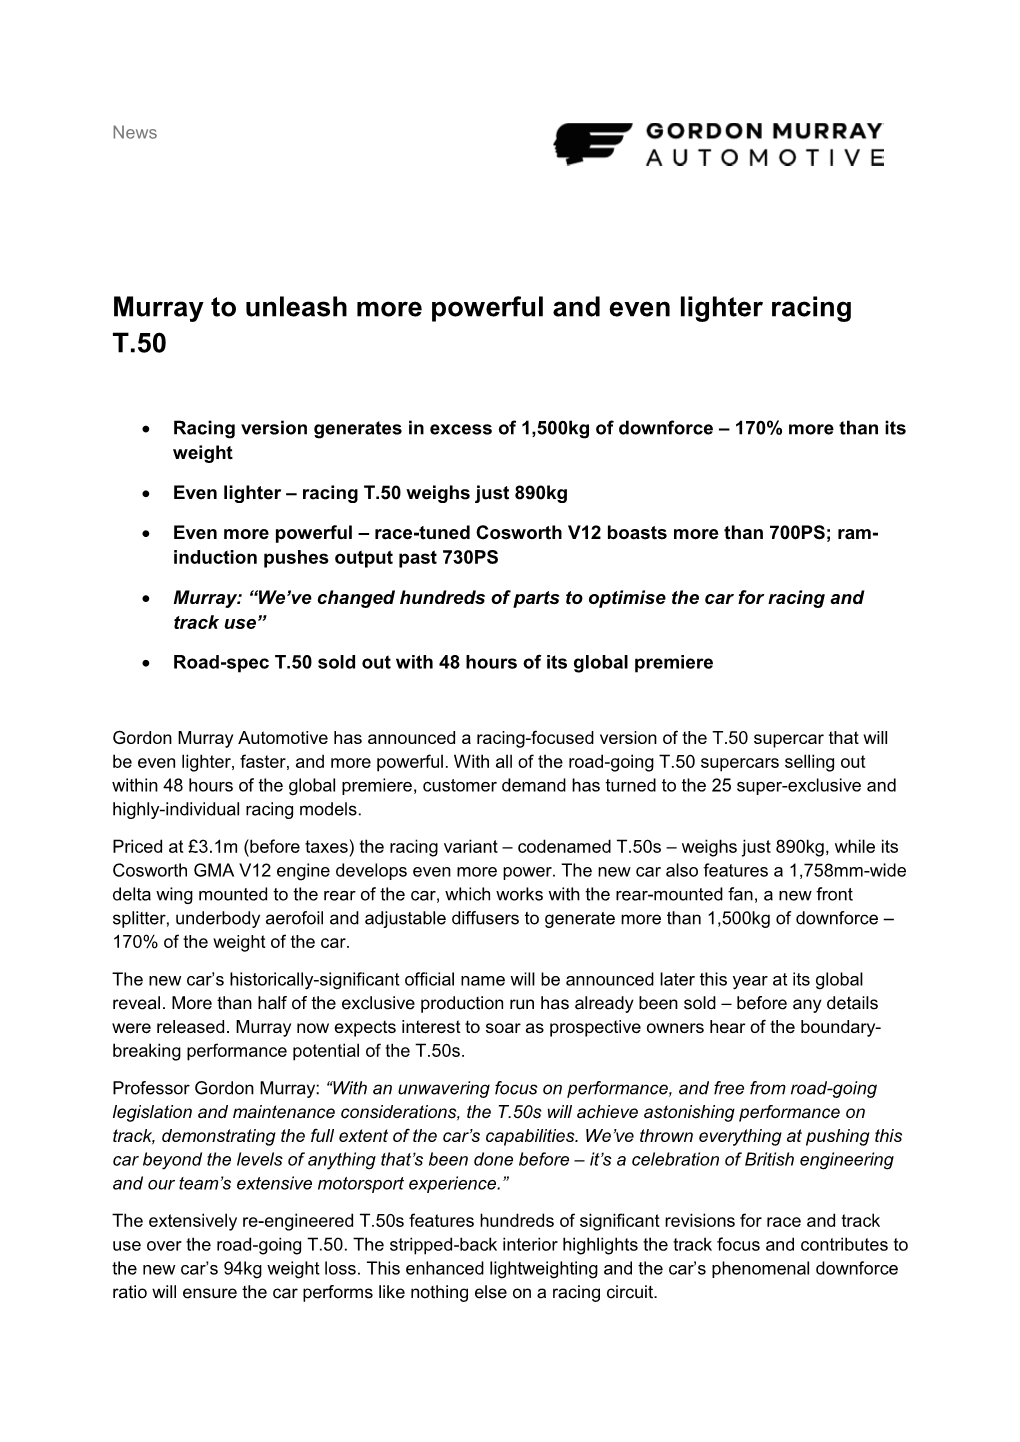 Murray to Unleash More Powerful and Even Lighter Racing T.50